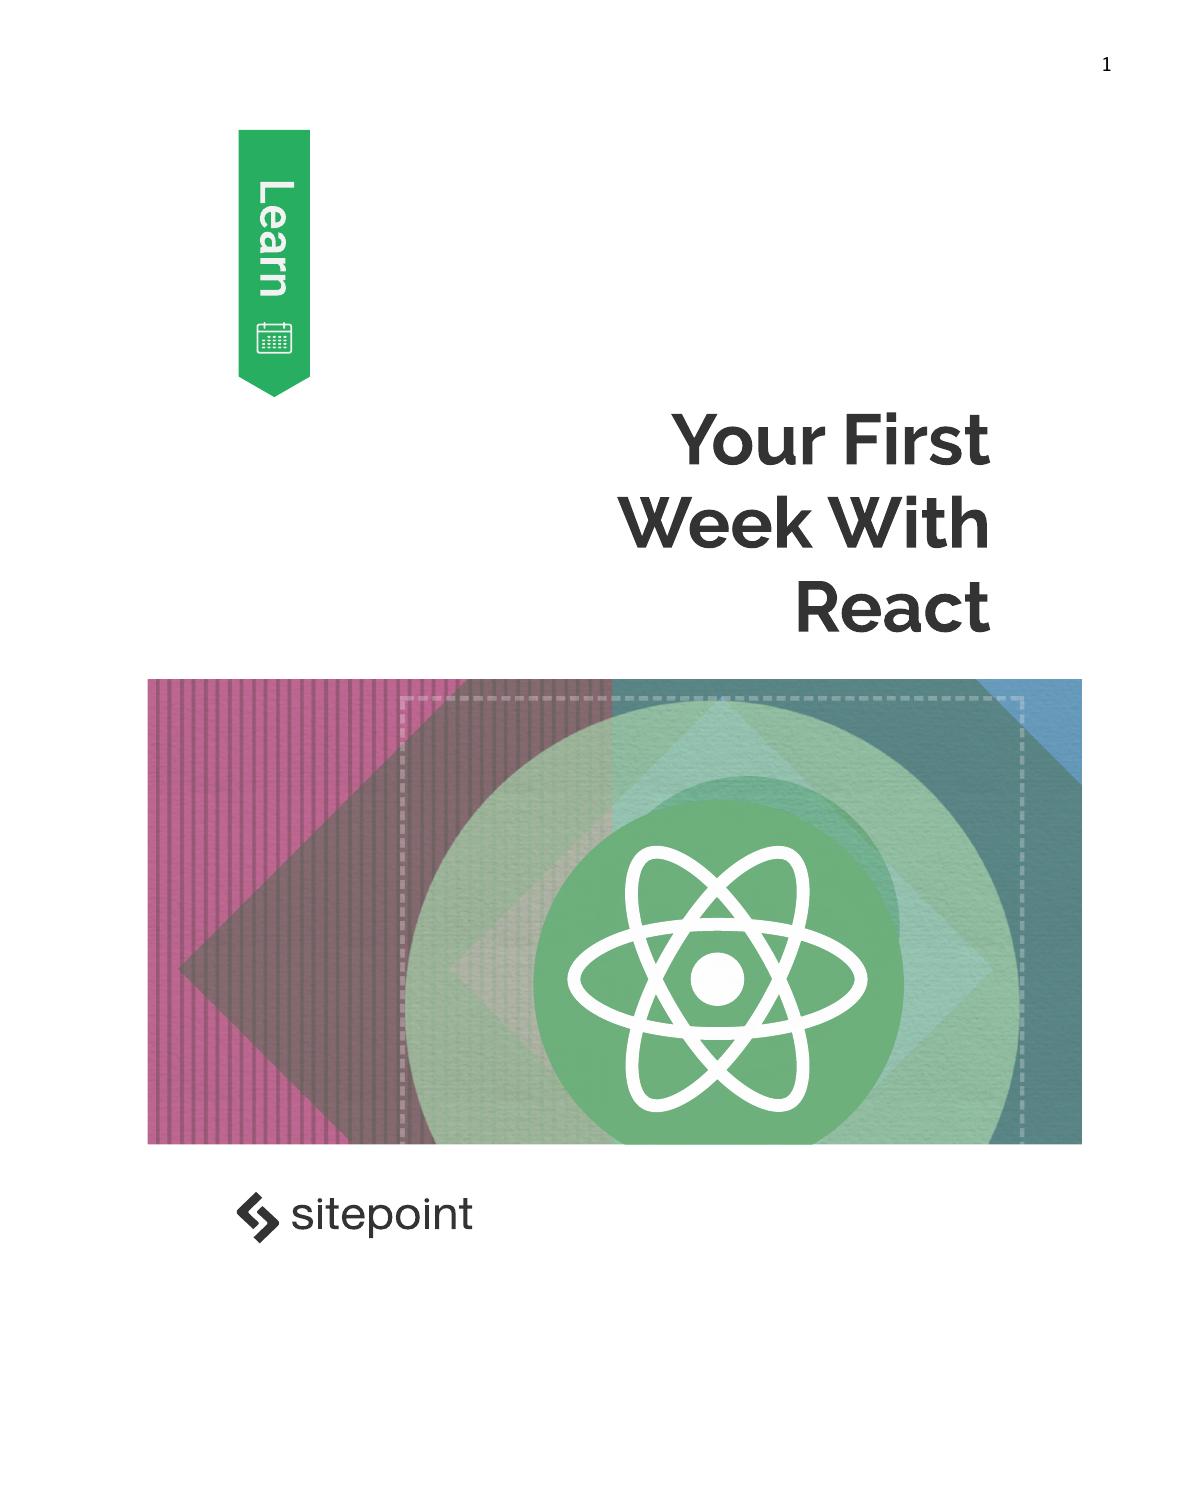 Your First Week With React